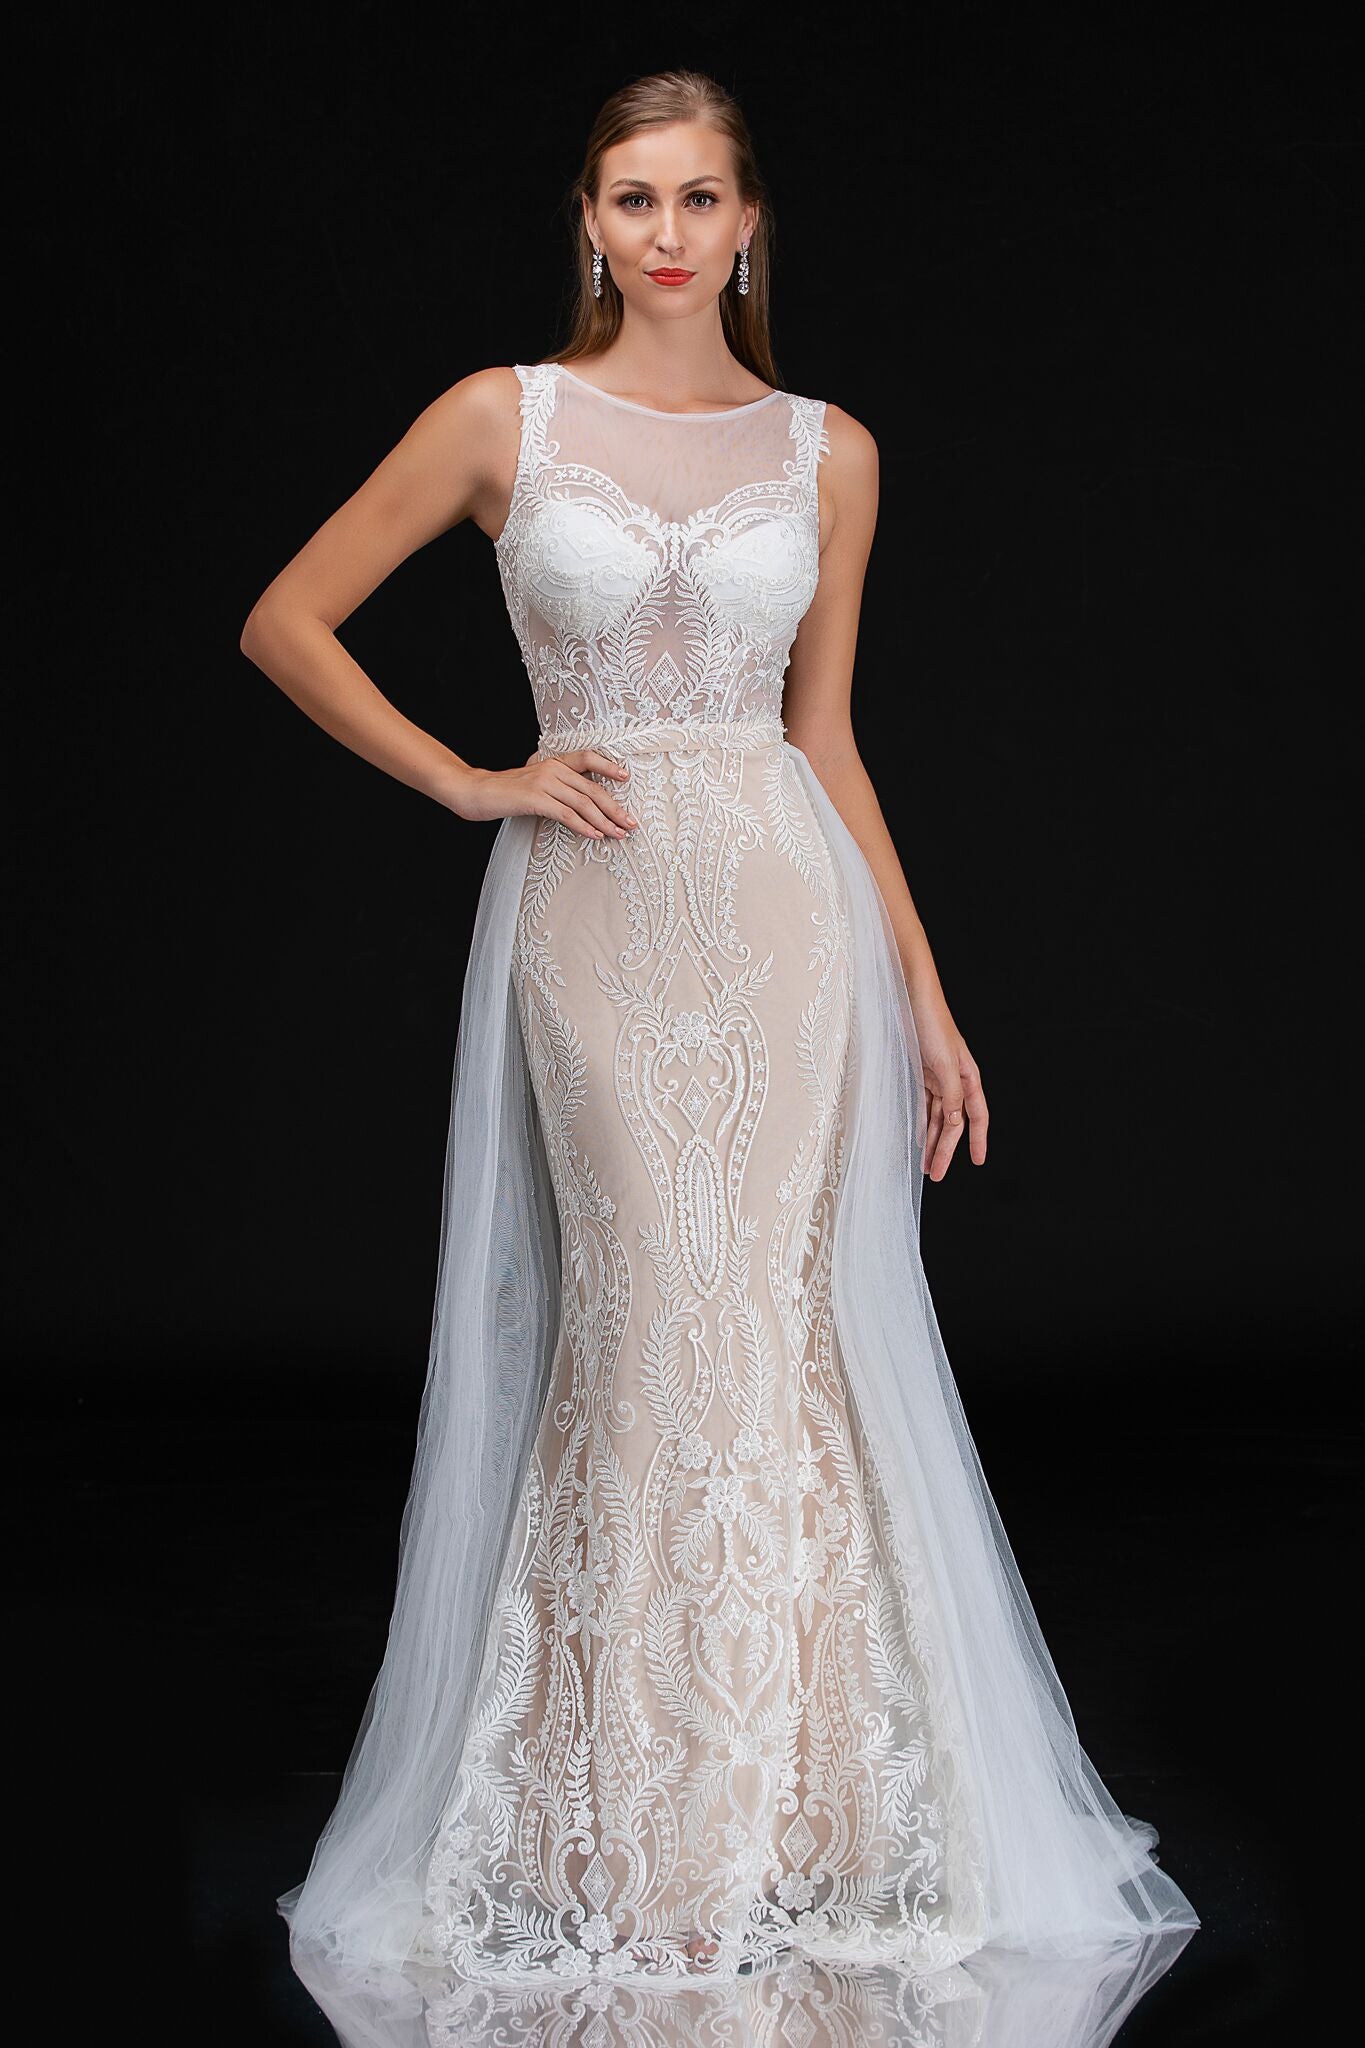 Nina Canacci 4191 is an Ivory & Nude Long Fitted Embroidered Lace Wedding Dress featuring a matching waist belt detachable with a flowing soft tulle overskirt. Open sheer embroidered back. Great destination wedding dress.  Available Sizes: 18  Available Colors: Ivory/Nude 